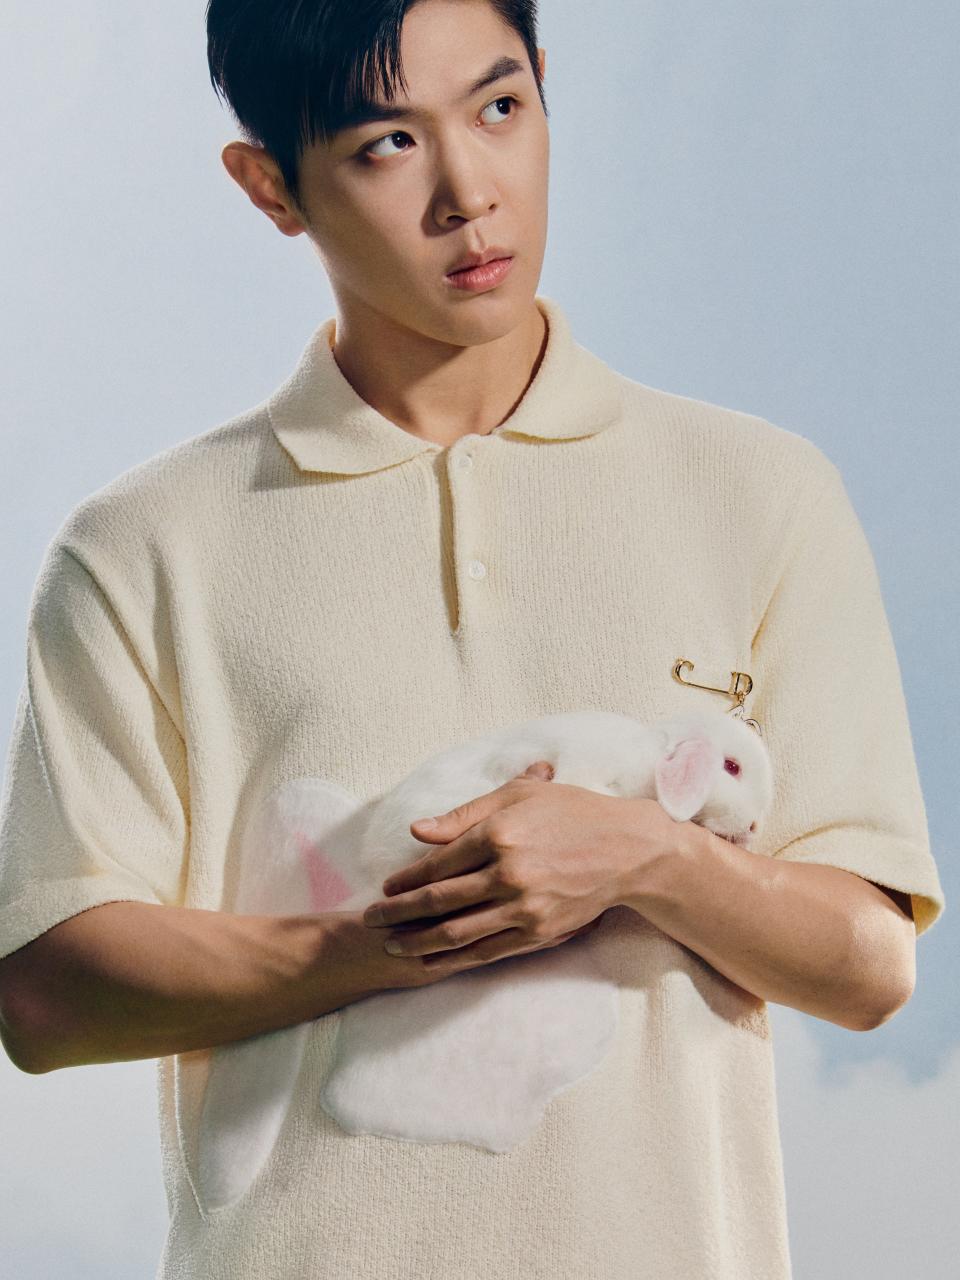 Dior Men's Year of the Rabbit campaign